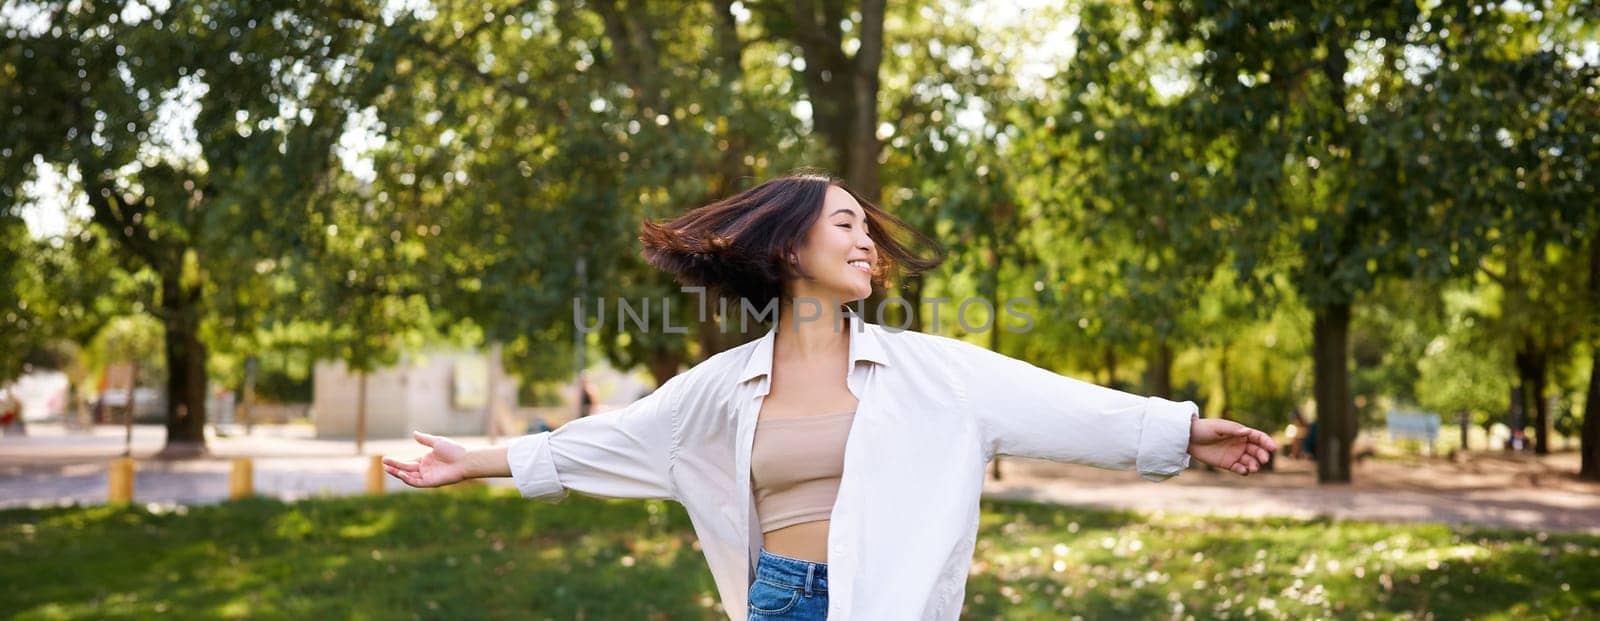 Freedom and people concept. Happy young asian woman dancing in park around trees, smiling and enjoying herself.